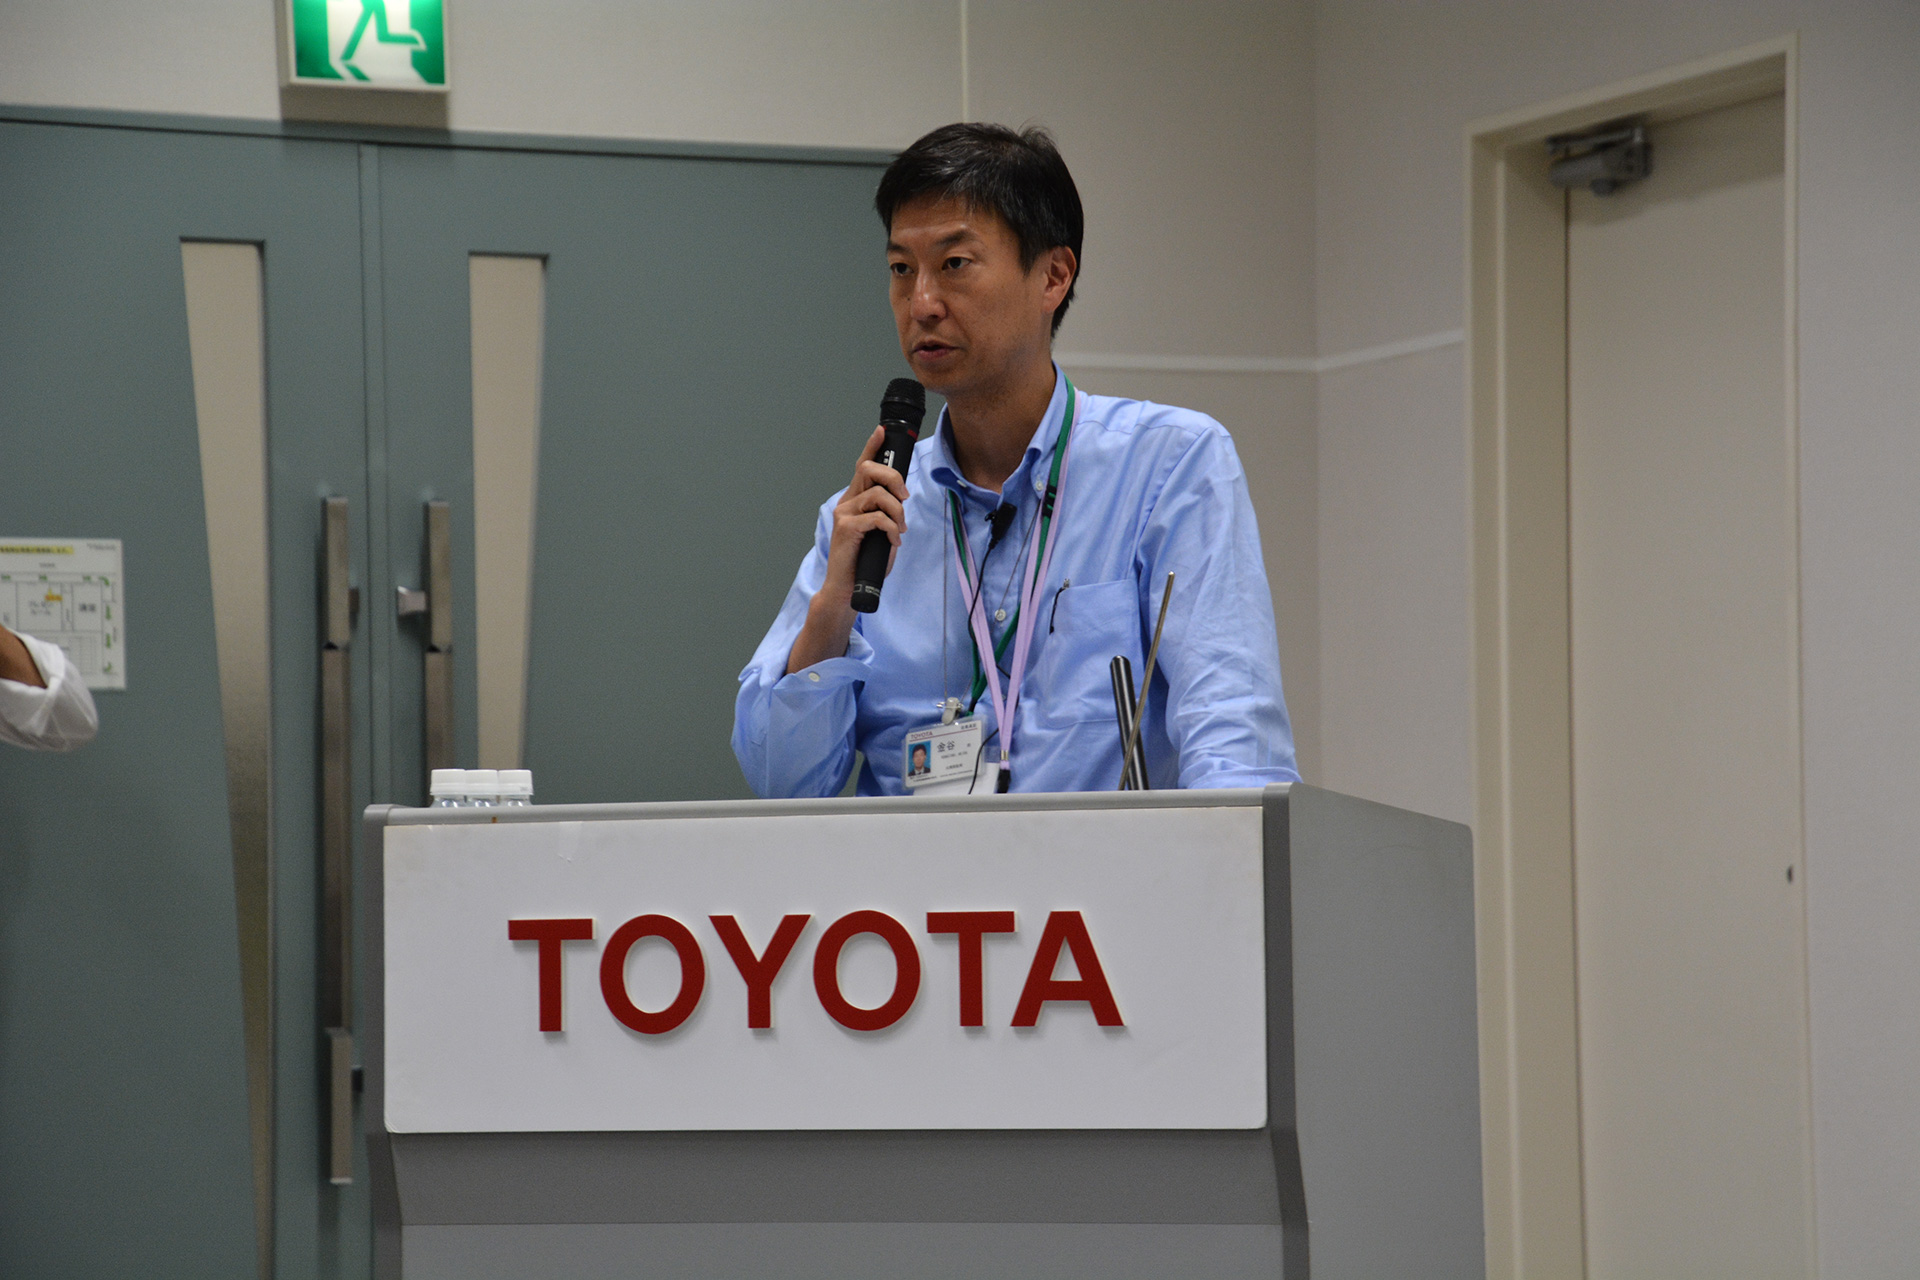 Lecture of Toyota's Safety Initiatives by Mr. Kanatani